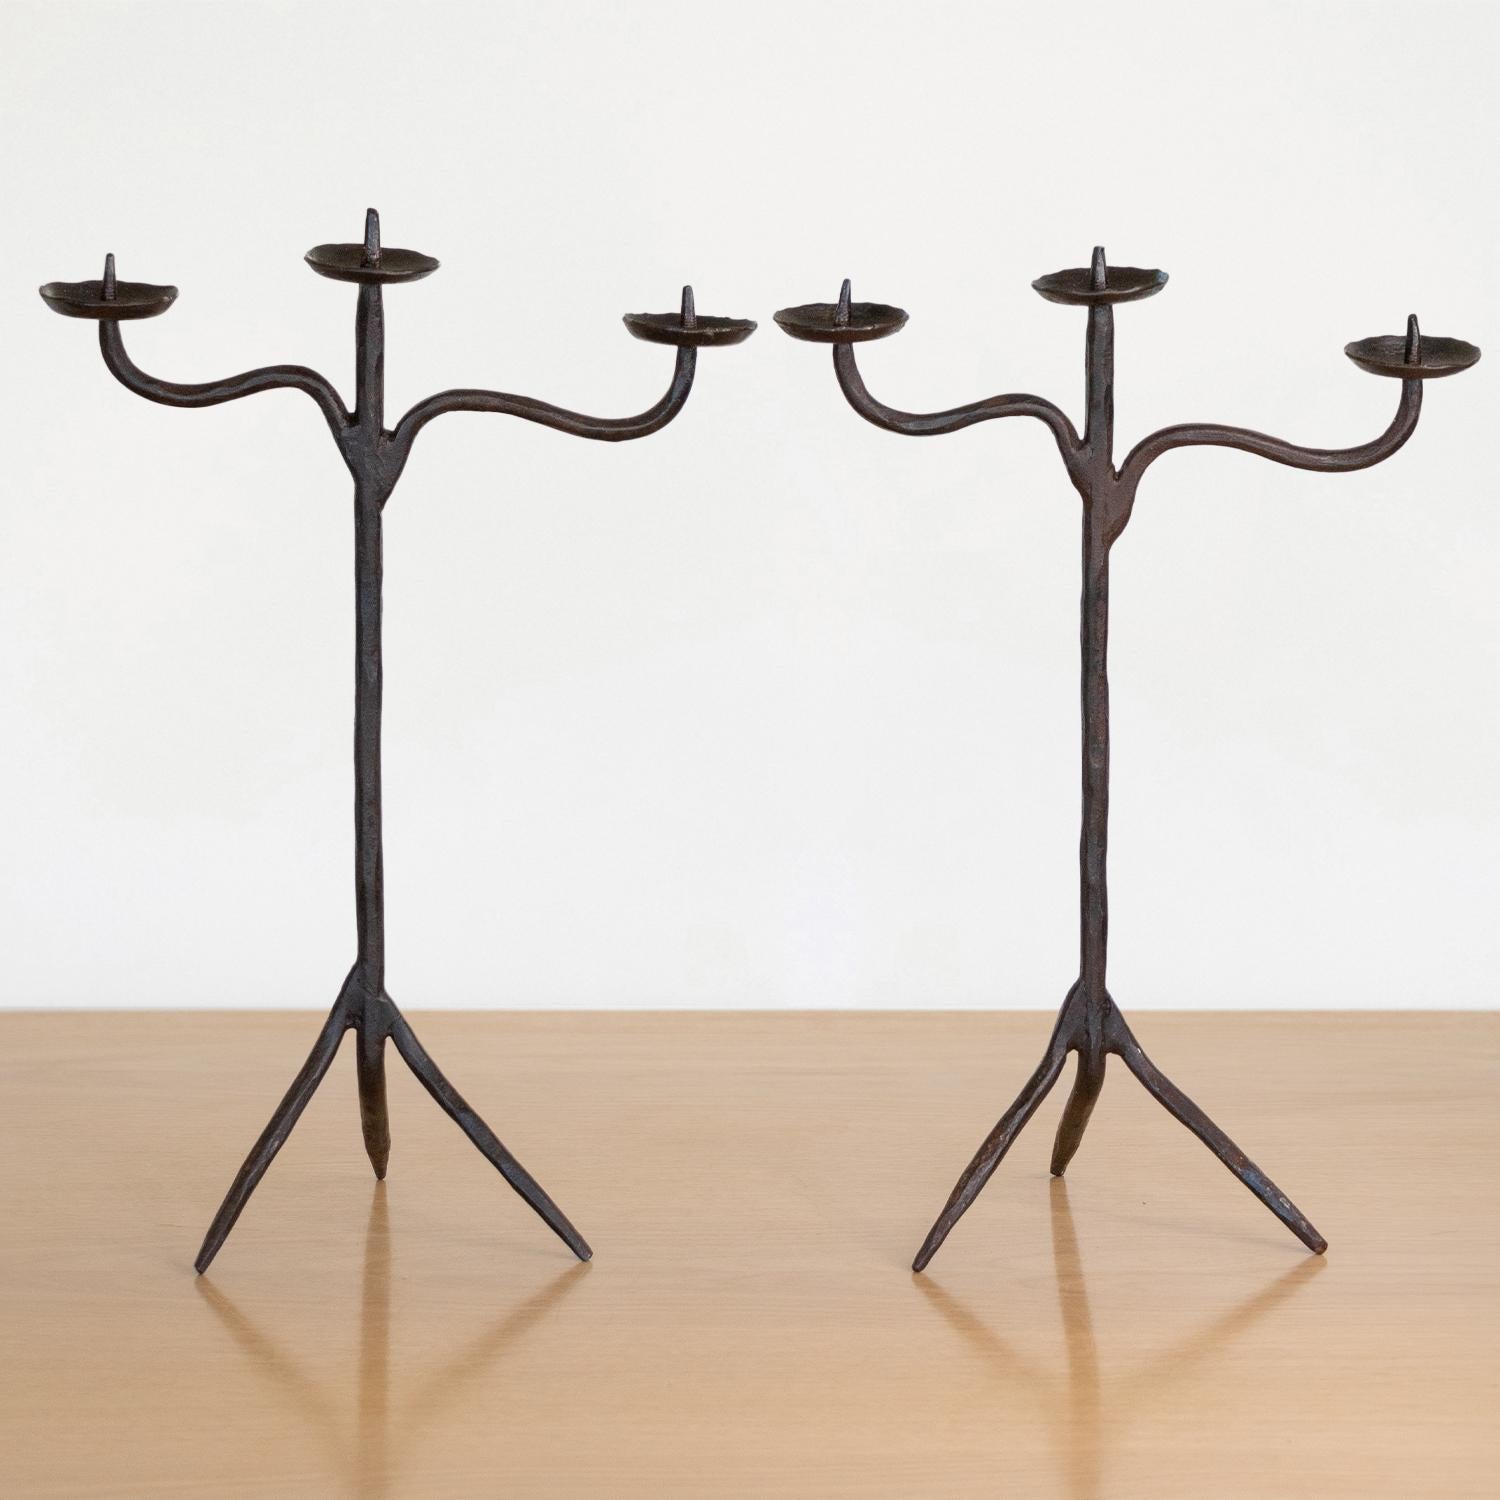 Fantastic pair of Brutalist candlesticks handcrafted in wrought iron and attributed to Atelier de Marolles, France, 1950s. Simple yet whimsical form each with three candle holders and tripod base. In good condition with nice age and patina.